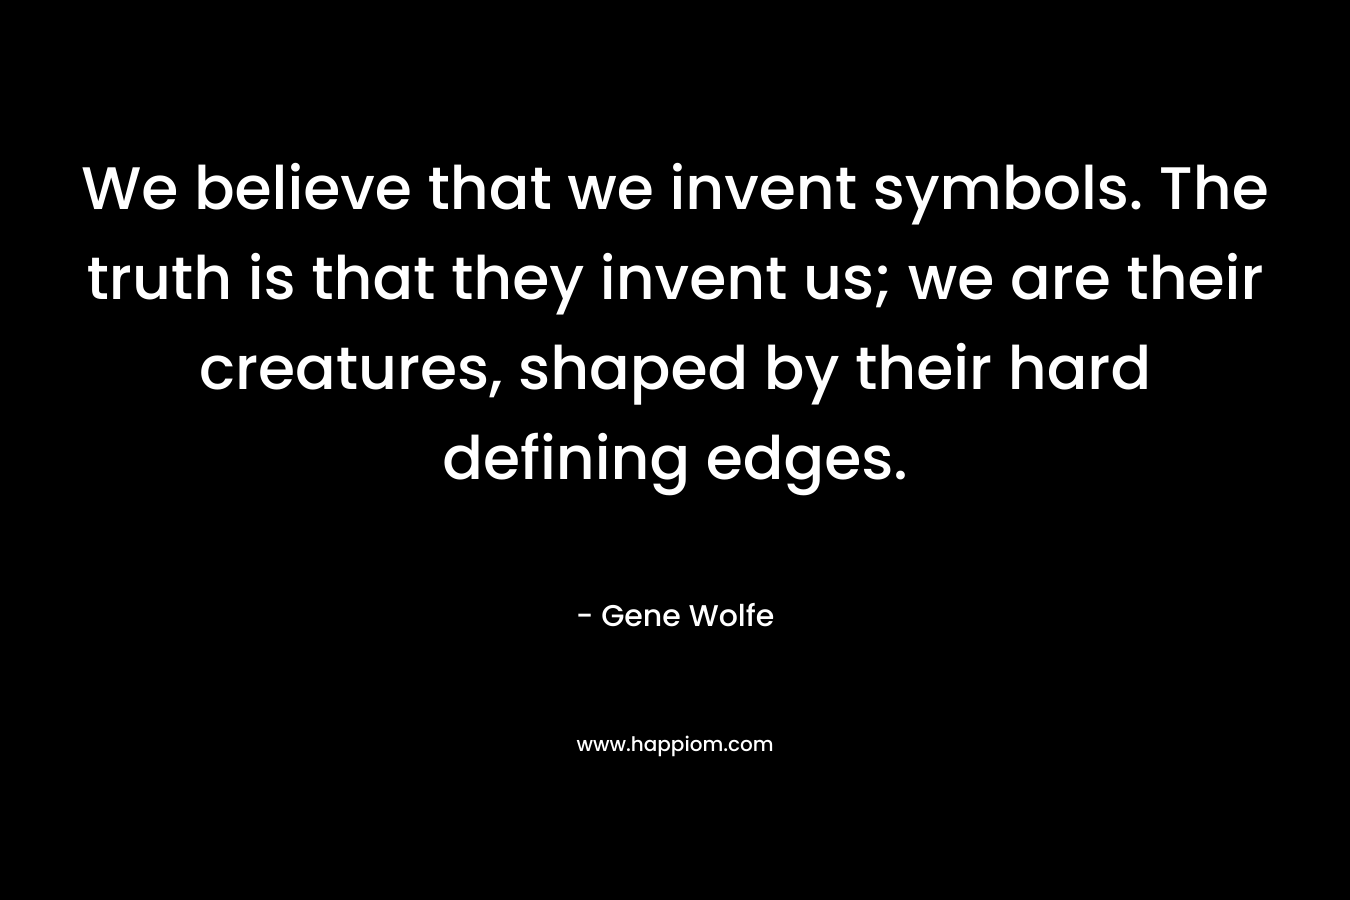 We believe that we invent symbols. The truth is that they invent us; we are their creatures, shaped by their hard defining edges. – Gene Wolfe